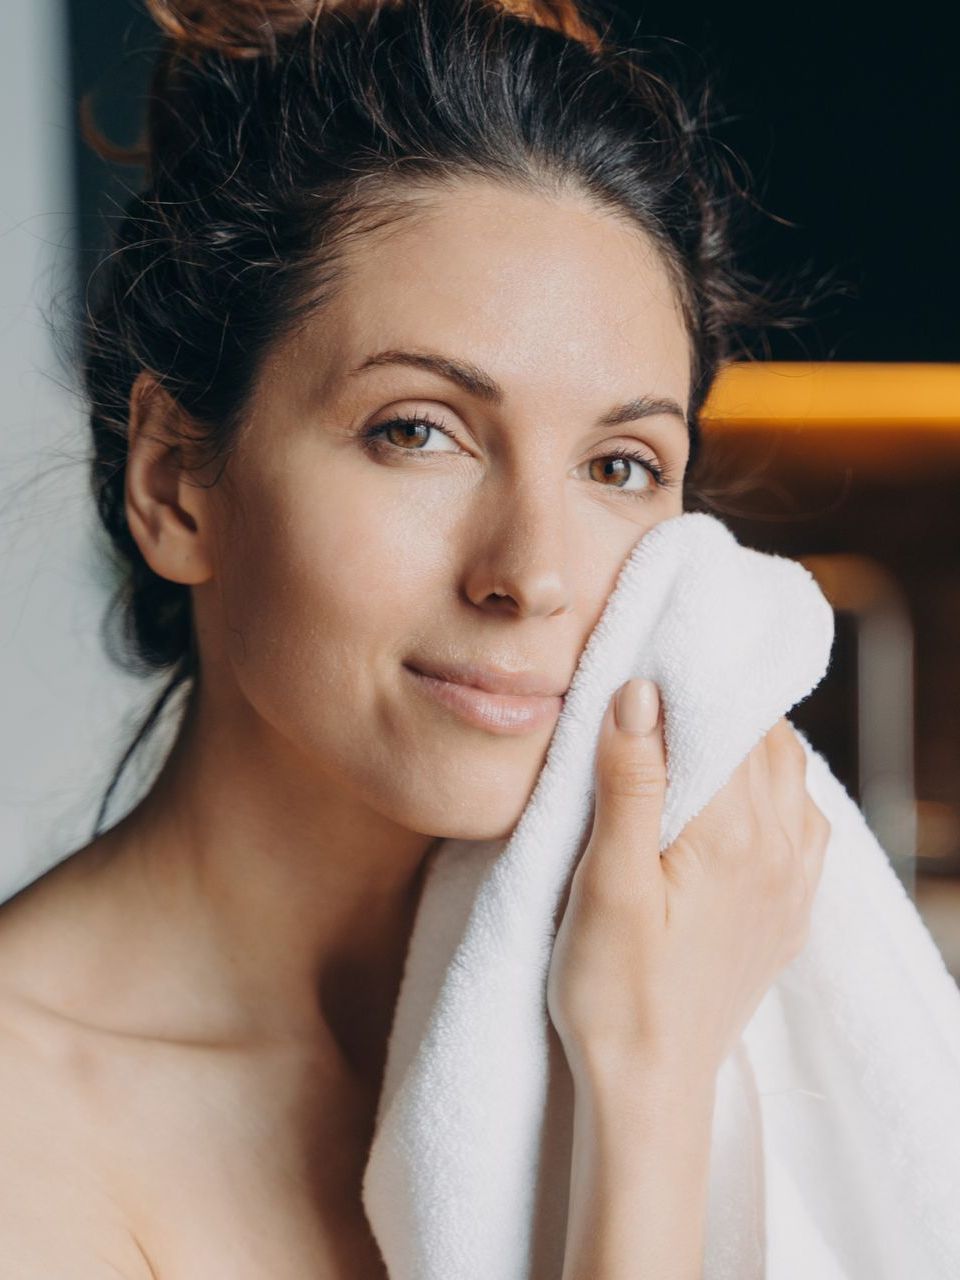 woman wiping face with towel